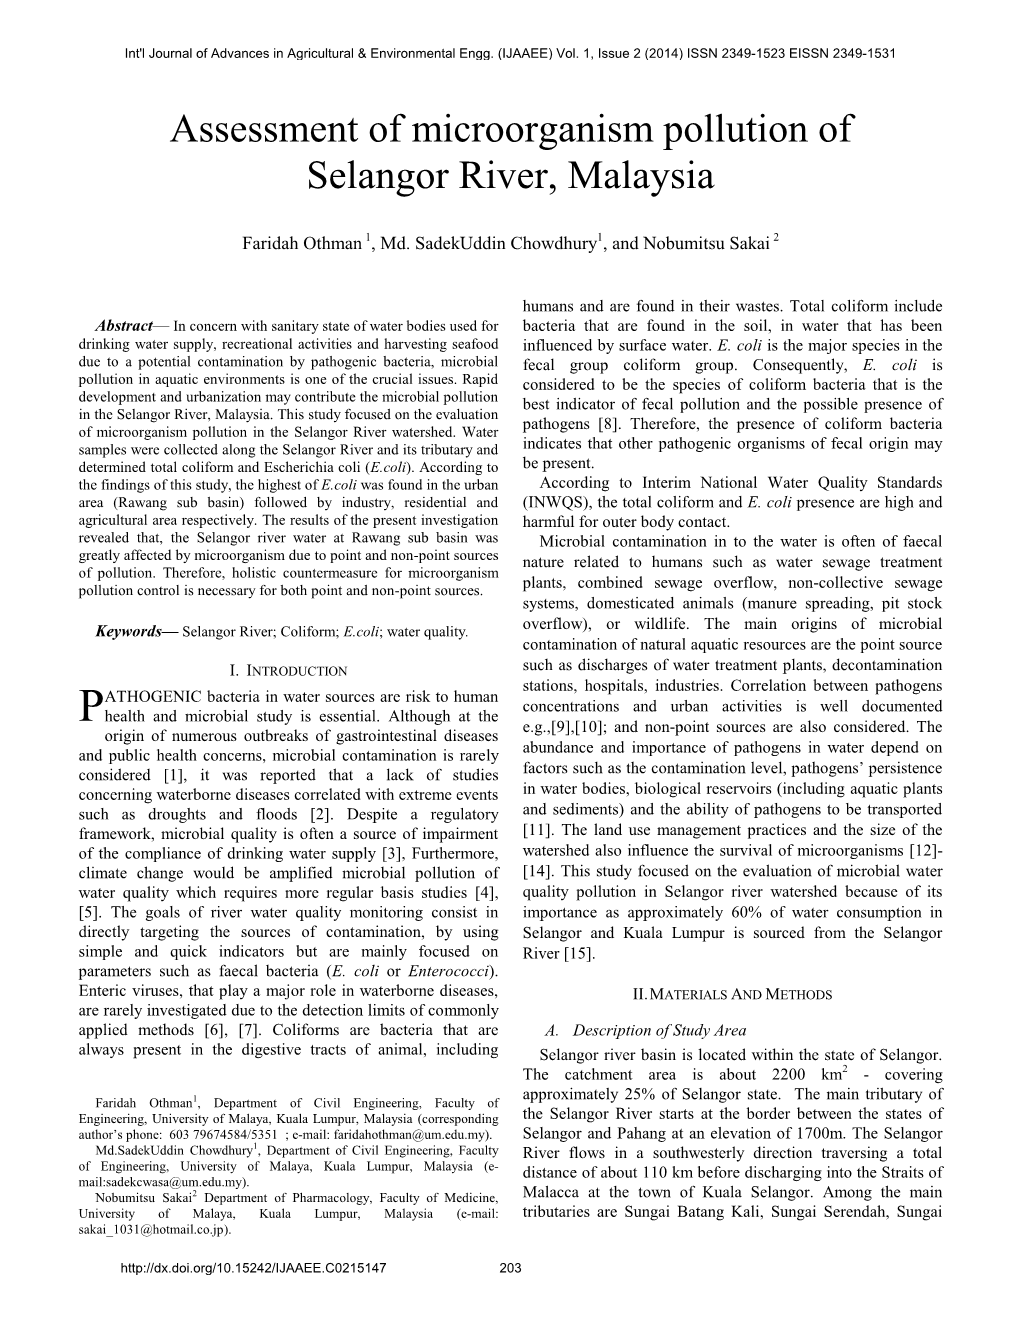 Assessment of Microorganism Pollution of Selangor River, Malaysia